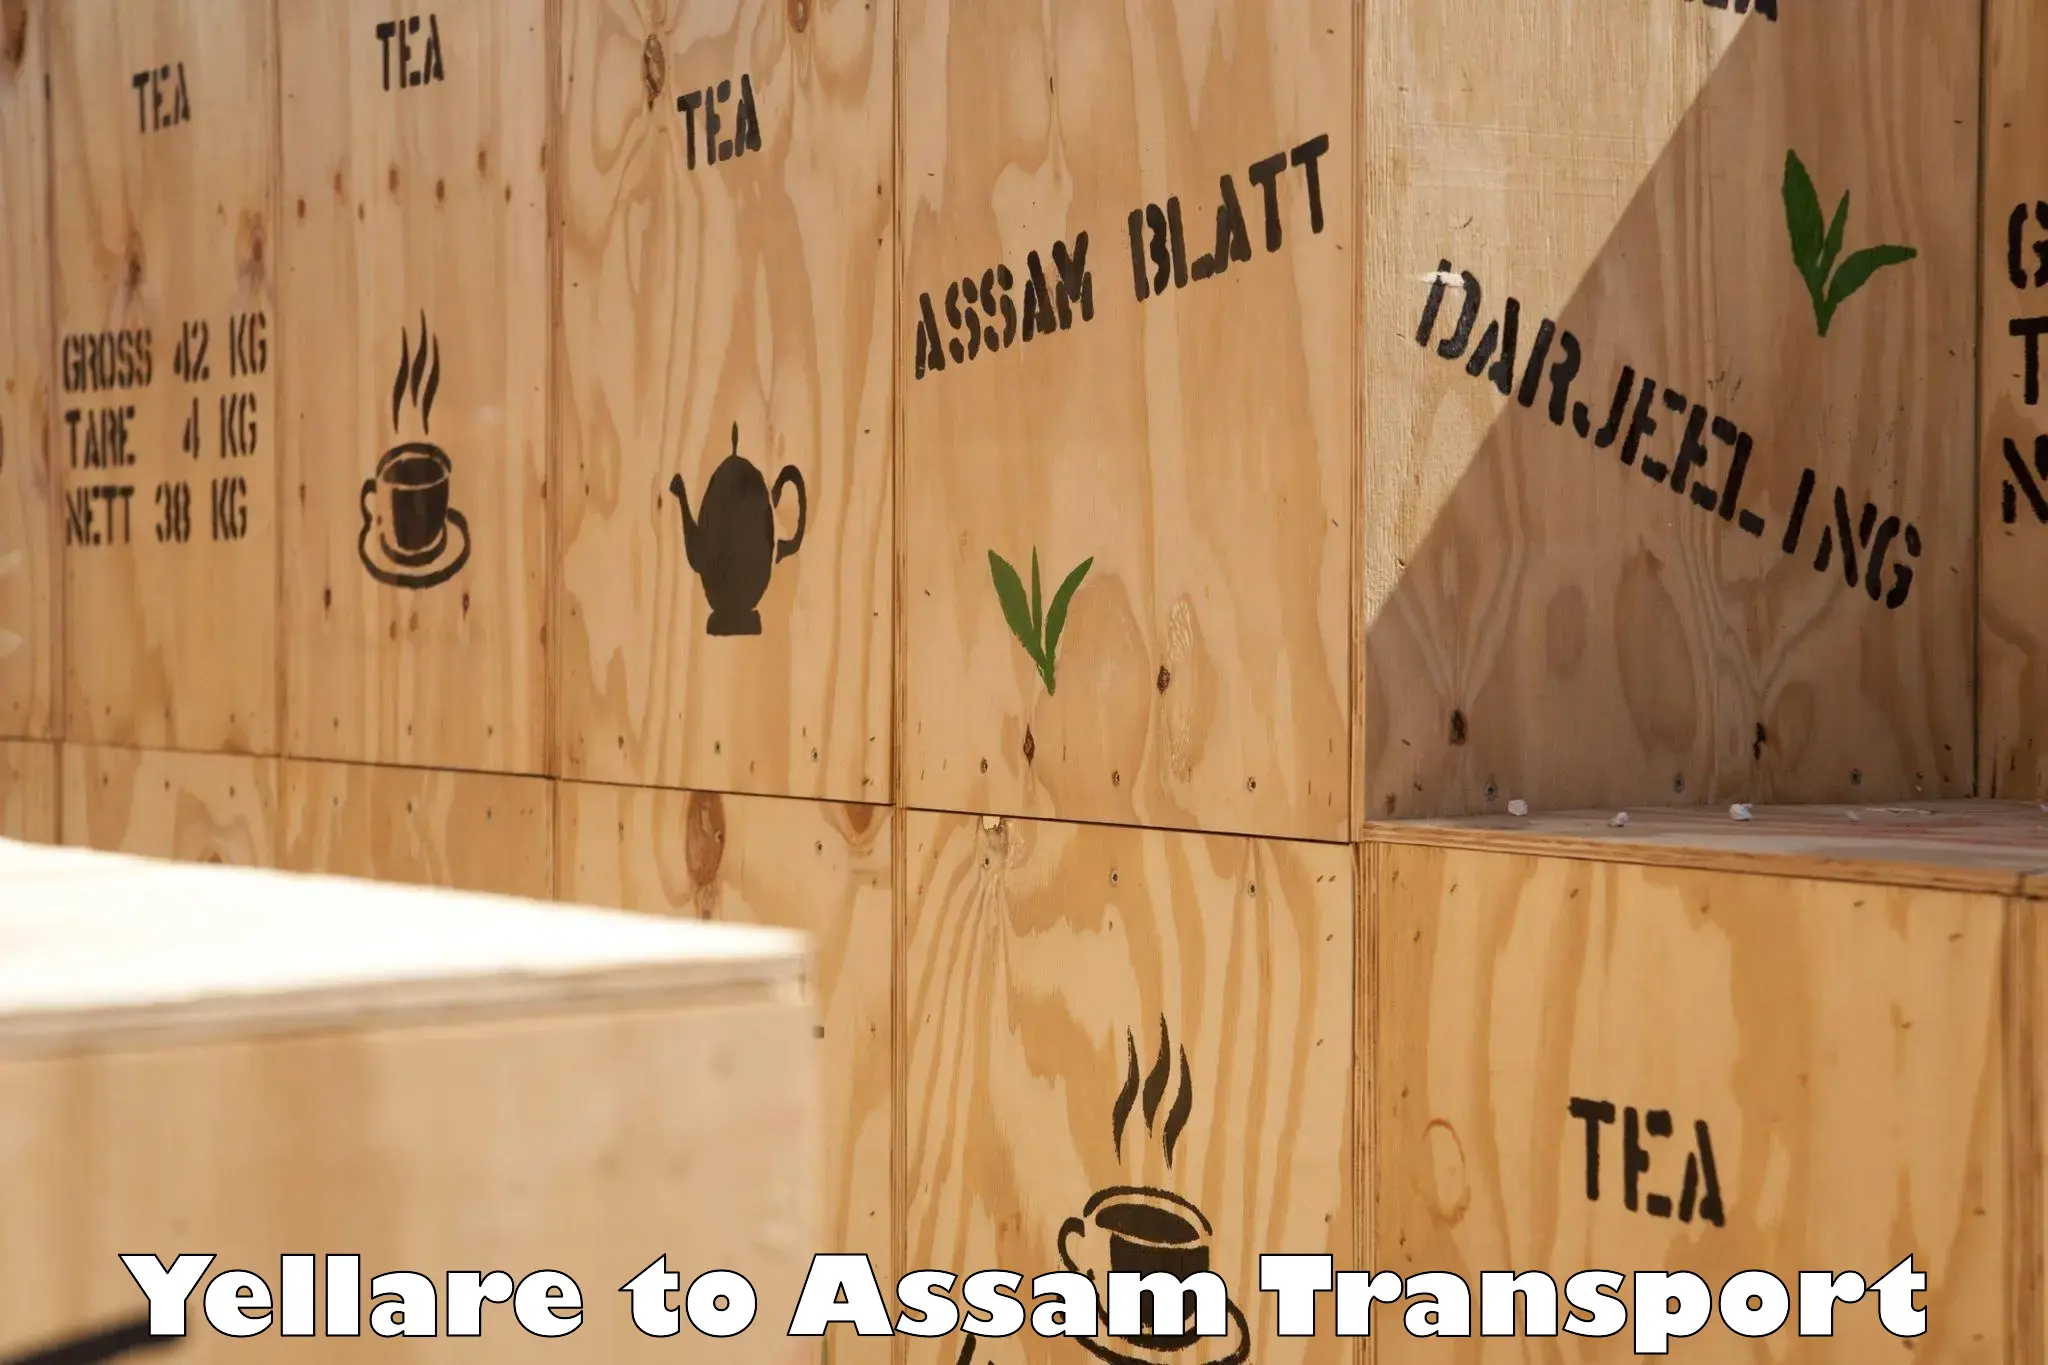 Domestic transport services Yellare to Lala Assam